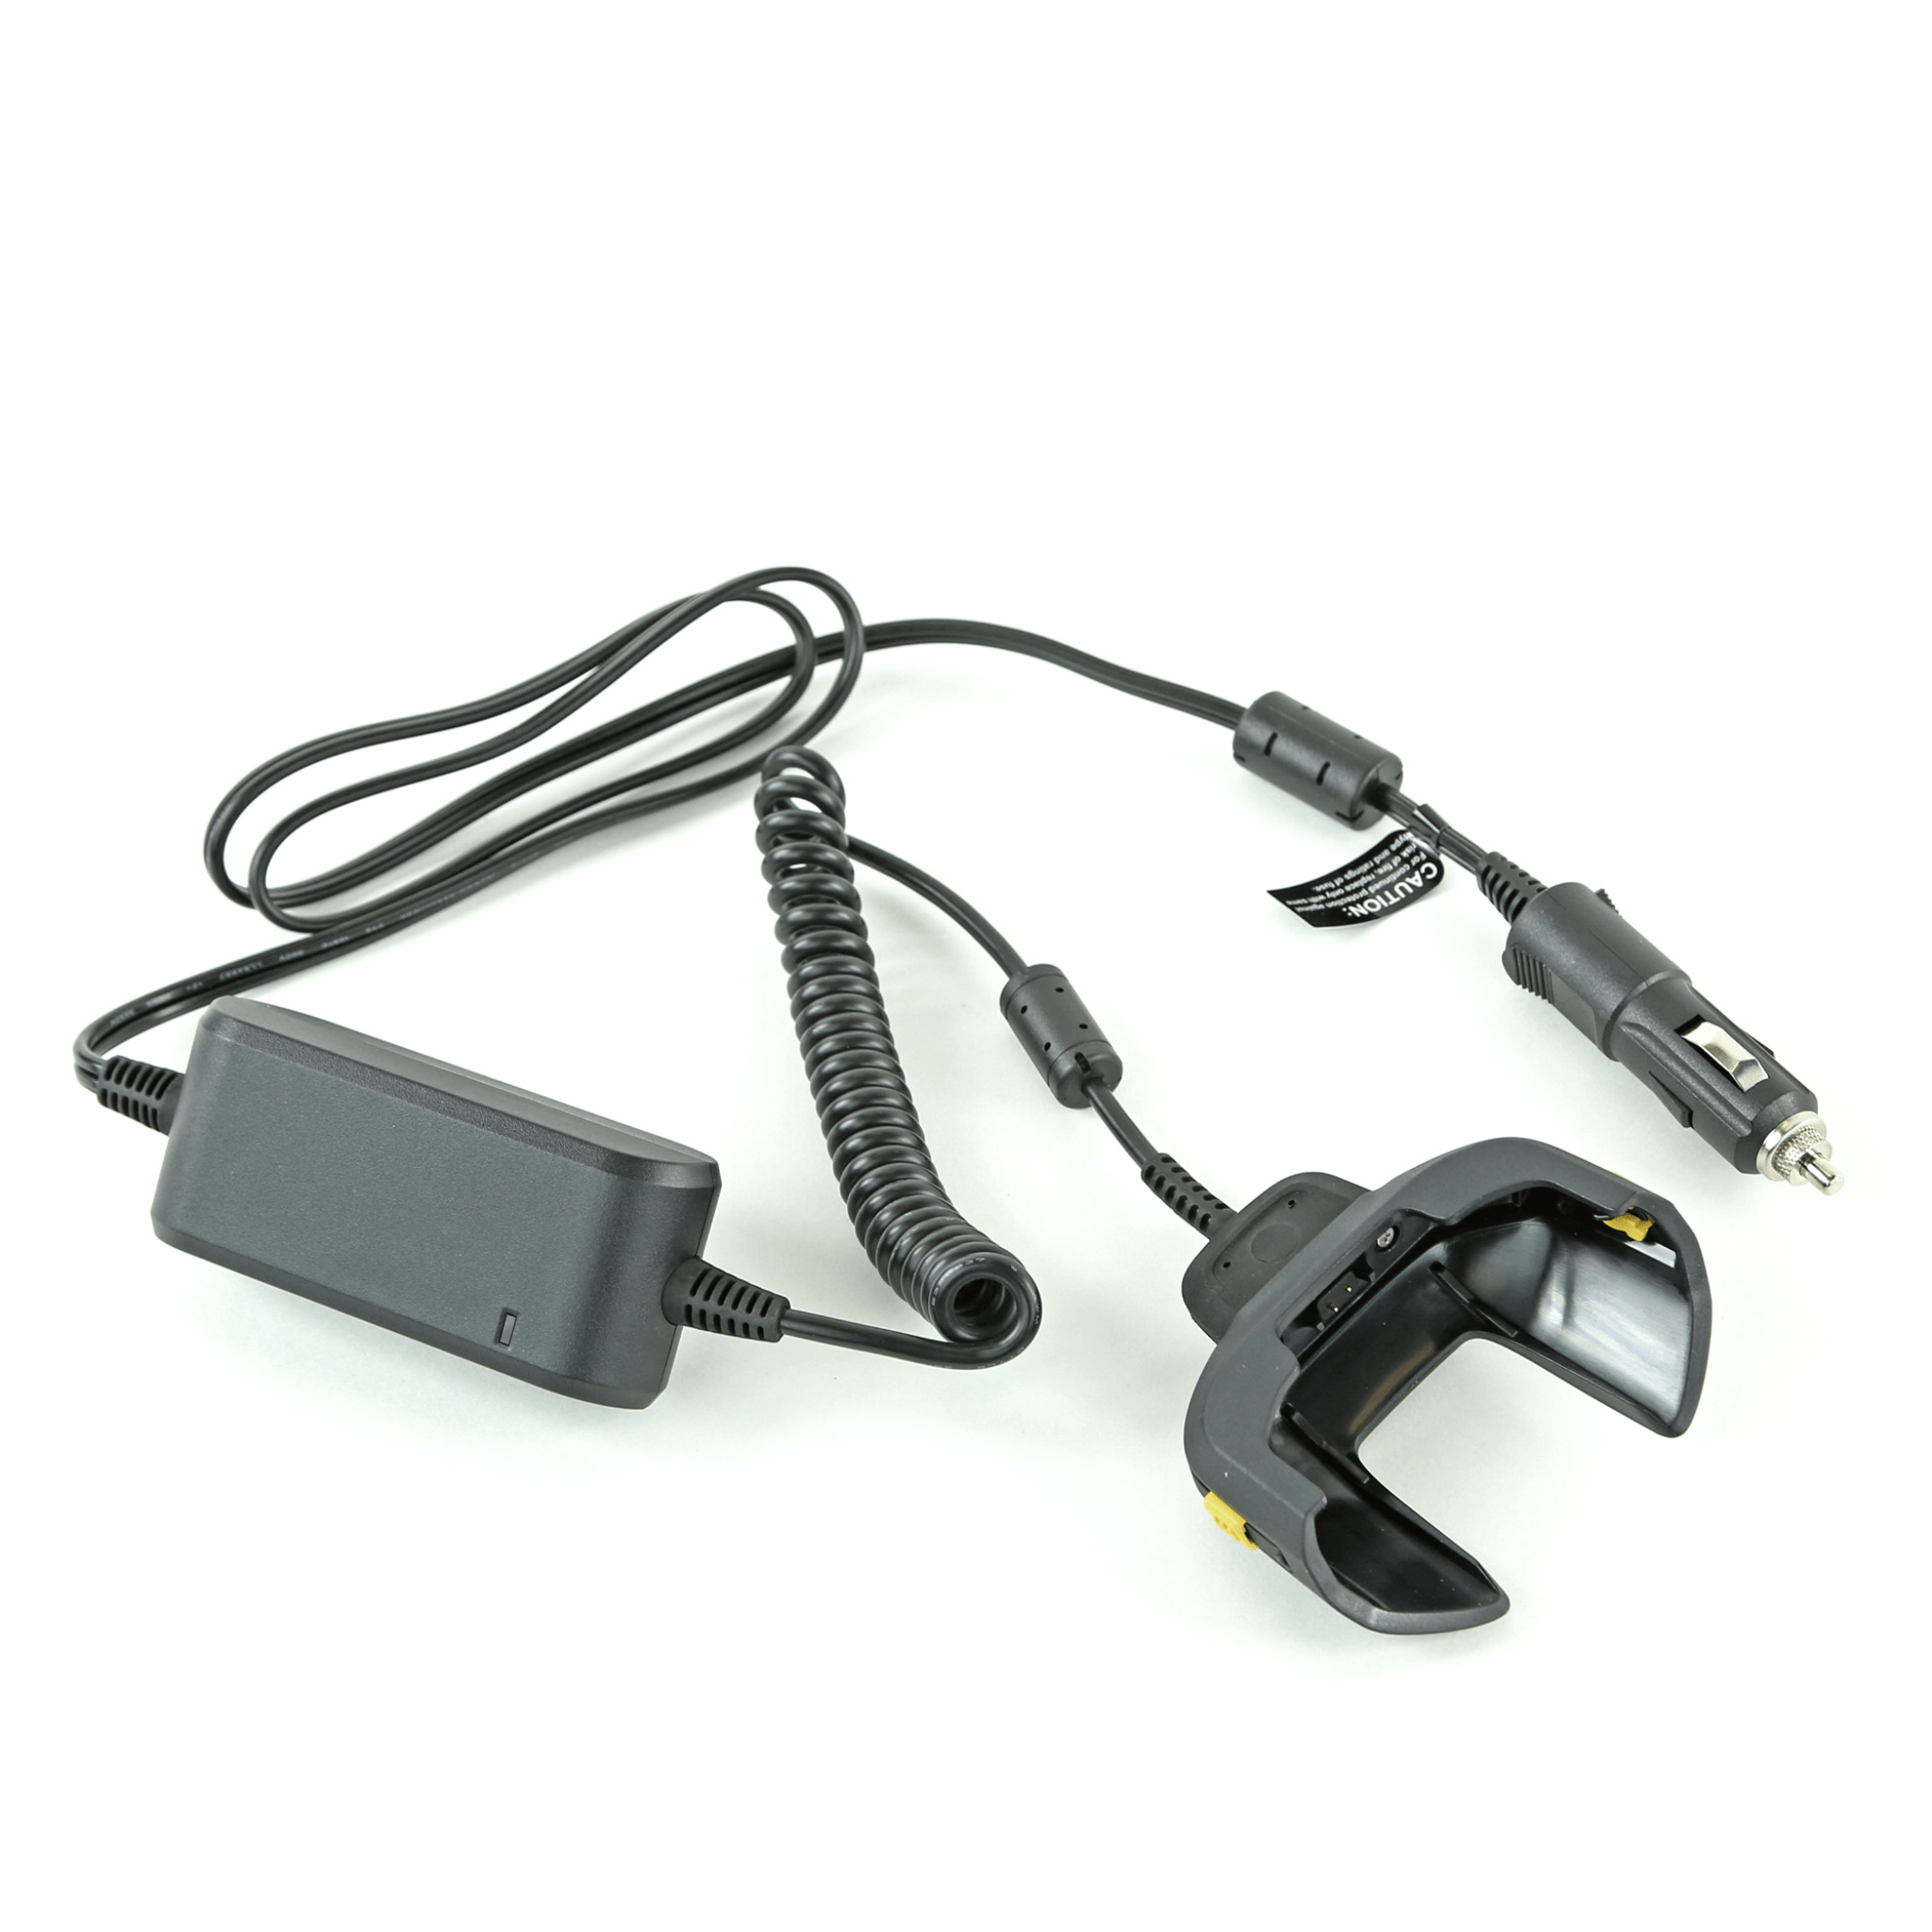 Zebra TC7x Vehicle Charging Cable Cup